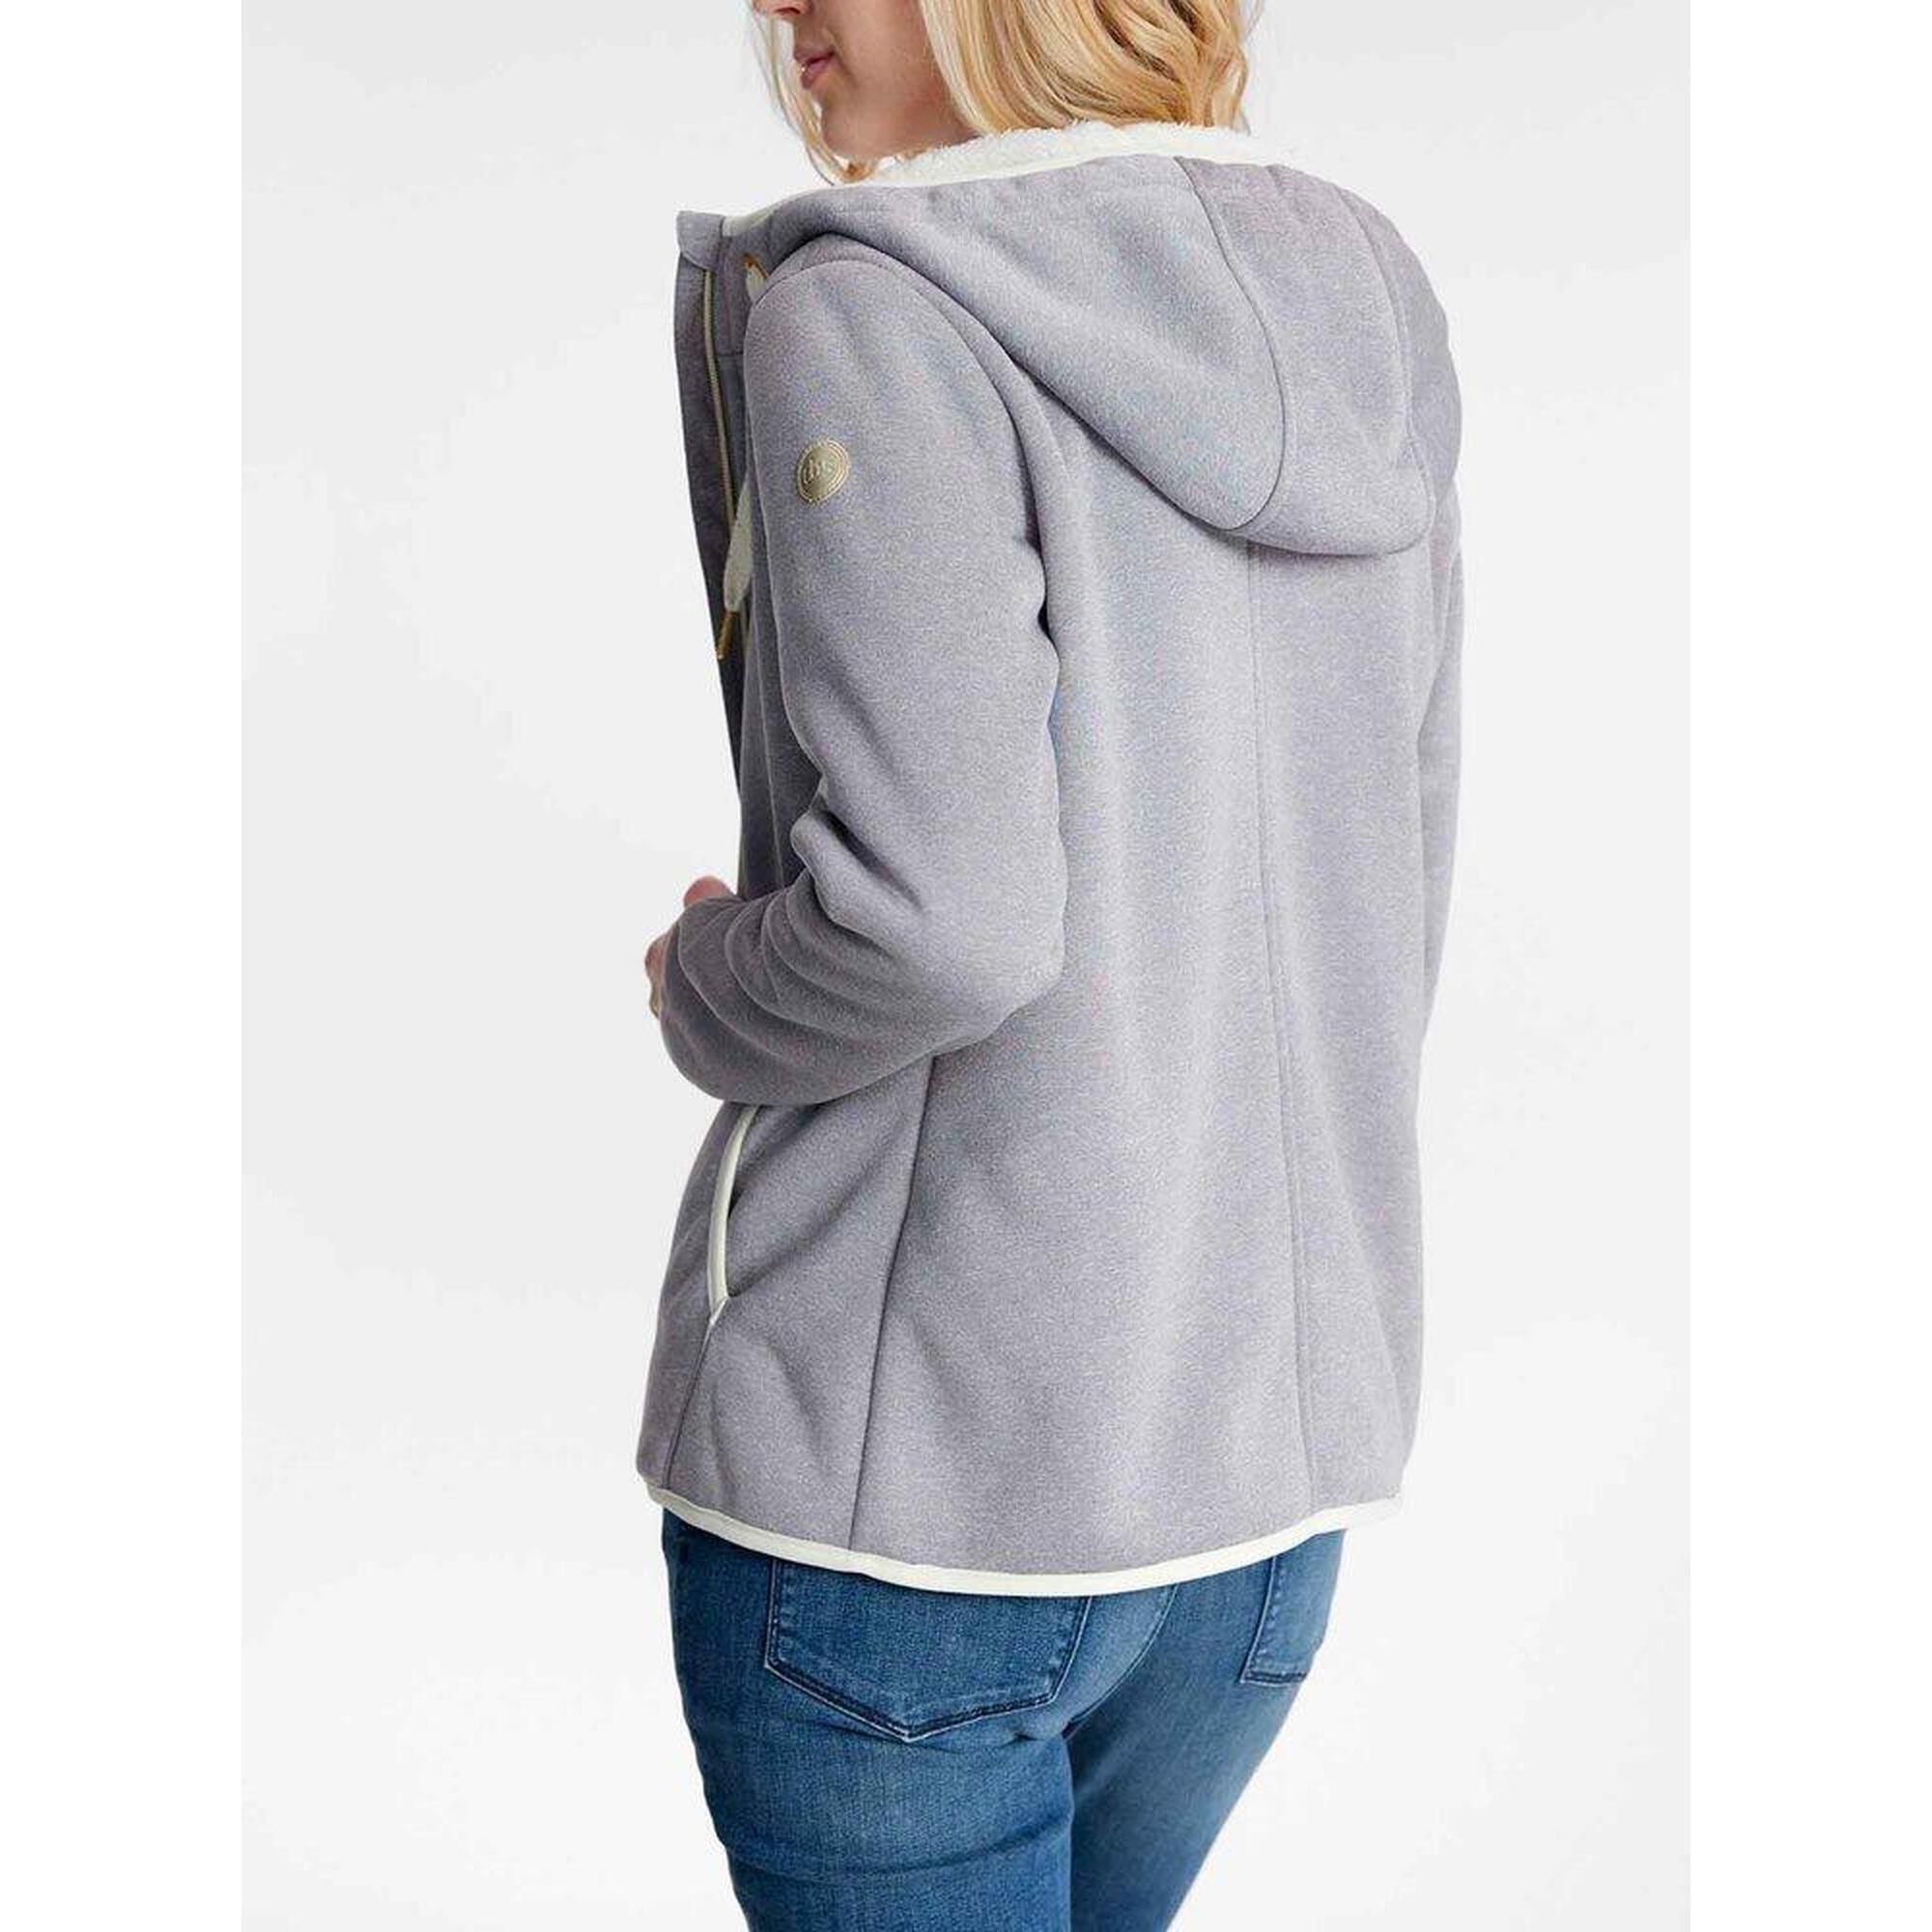 Polaire Femme - KAYLAZIP Gris Chine